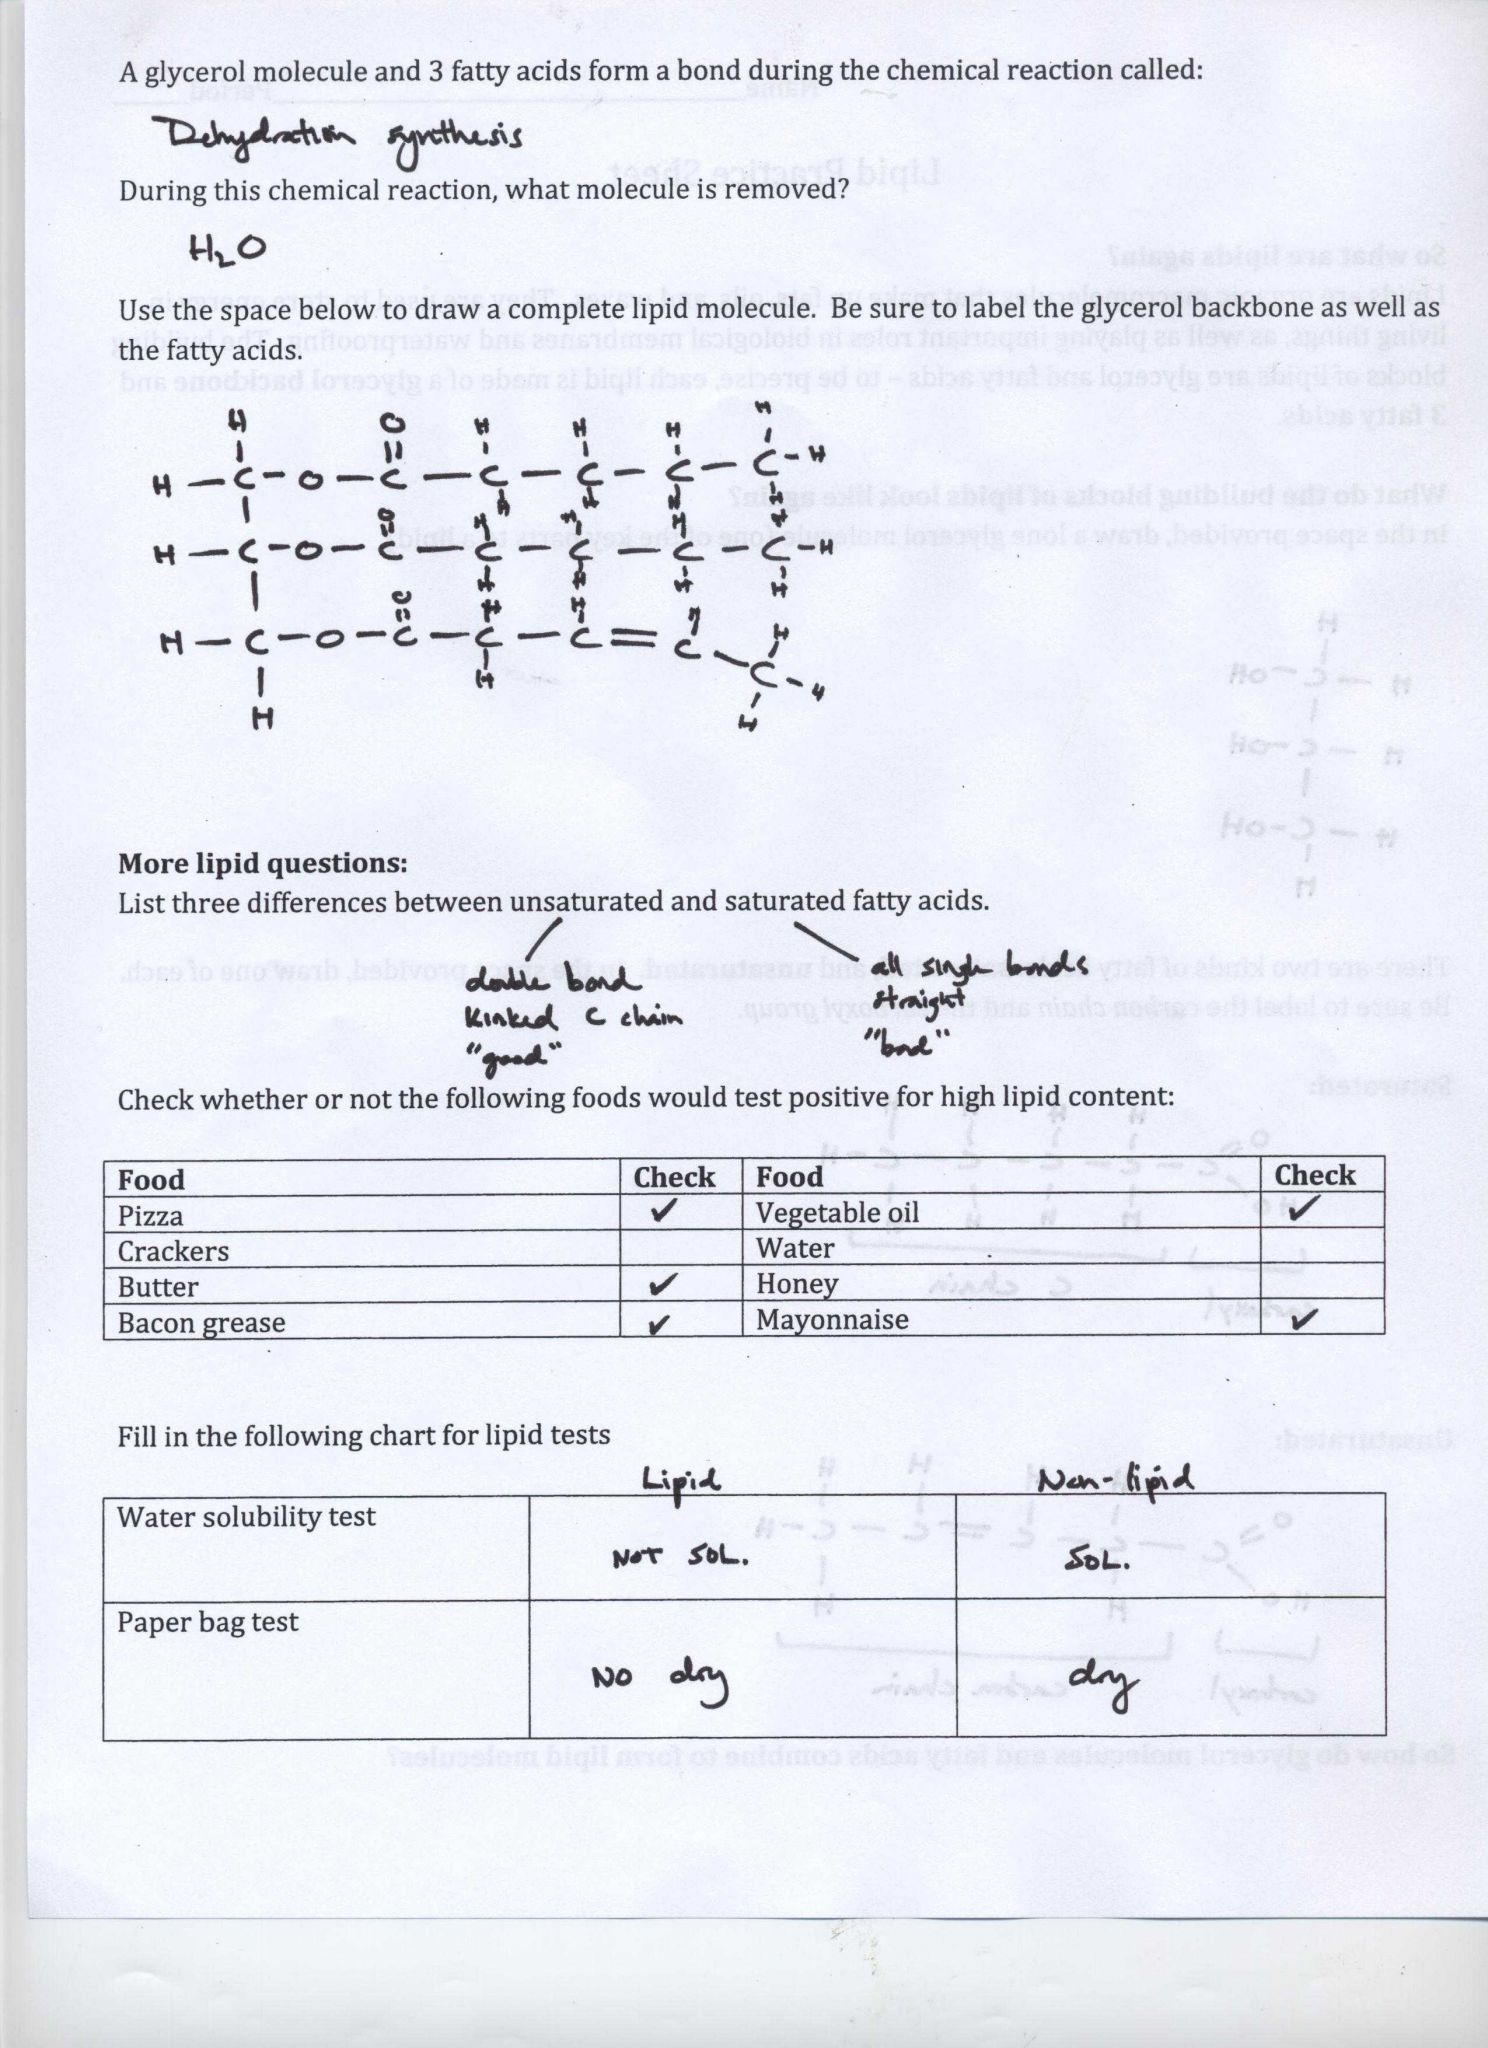 Cellular Transport Worksheet Section A Cell Membrane Structure Answer Key Also Cellular Transport Worksheet Answer Key Da9de1312a9b Battk